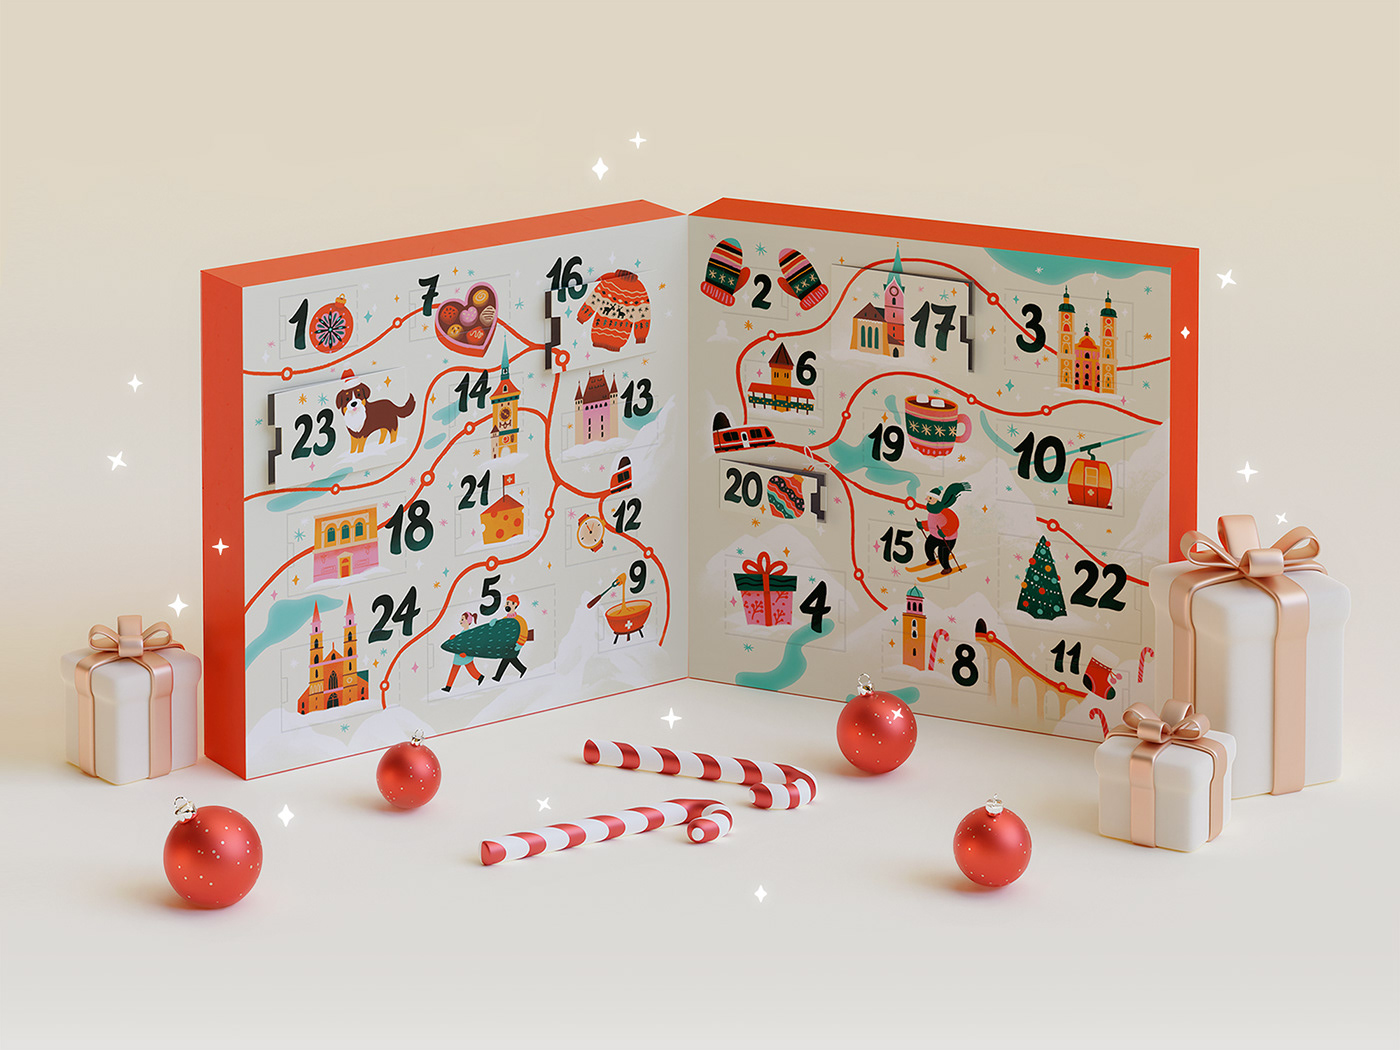 Advent calendar box spread with some doors open on stage with Christmas decorations and gifts.